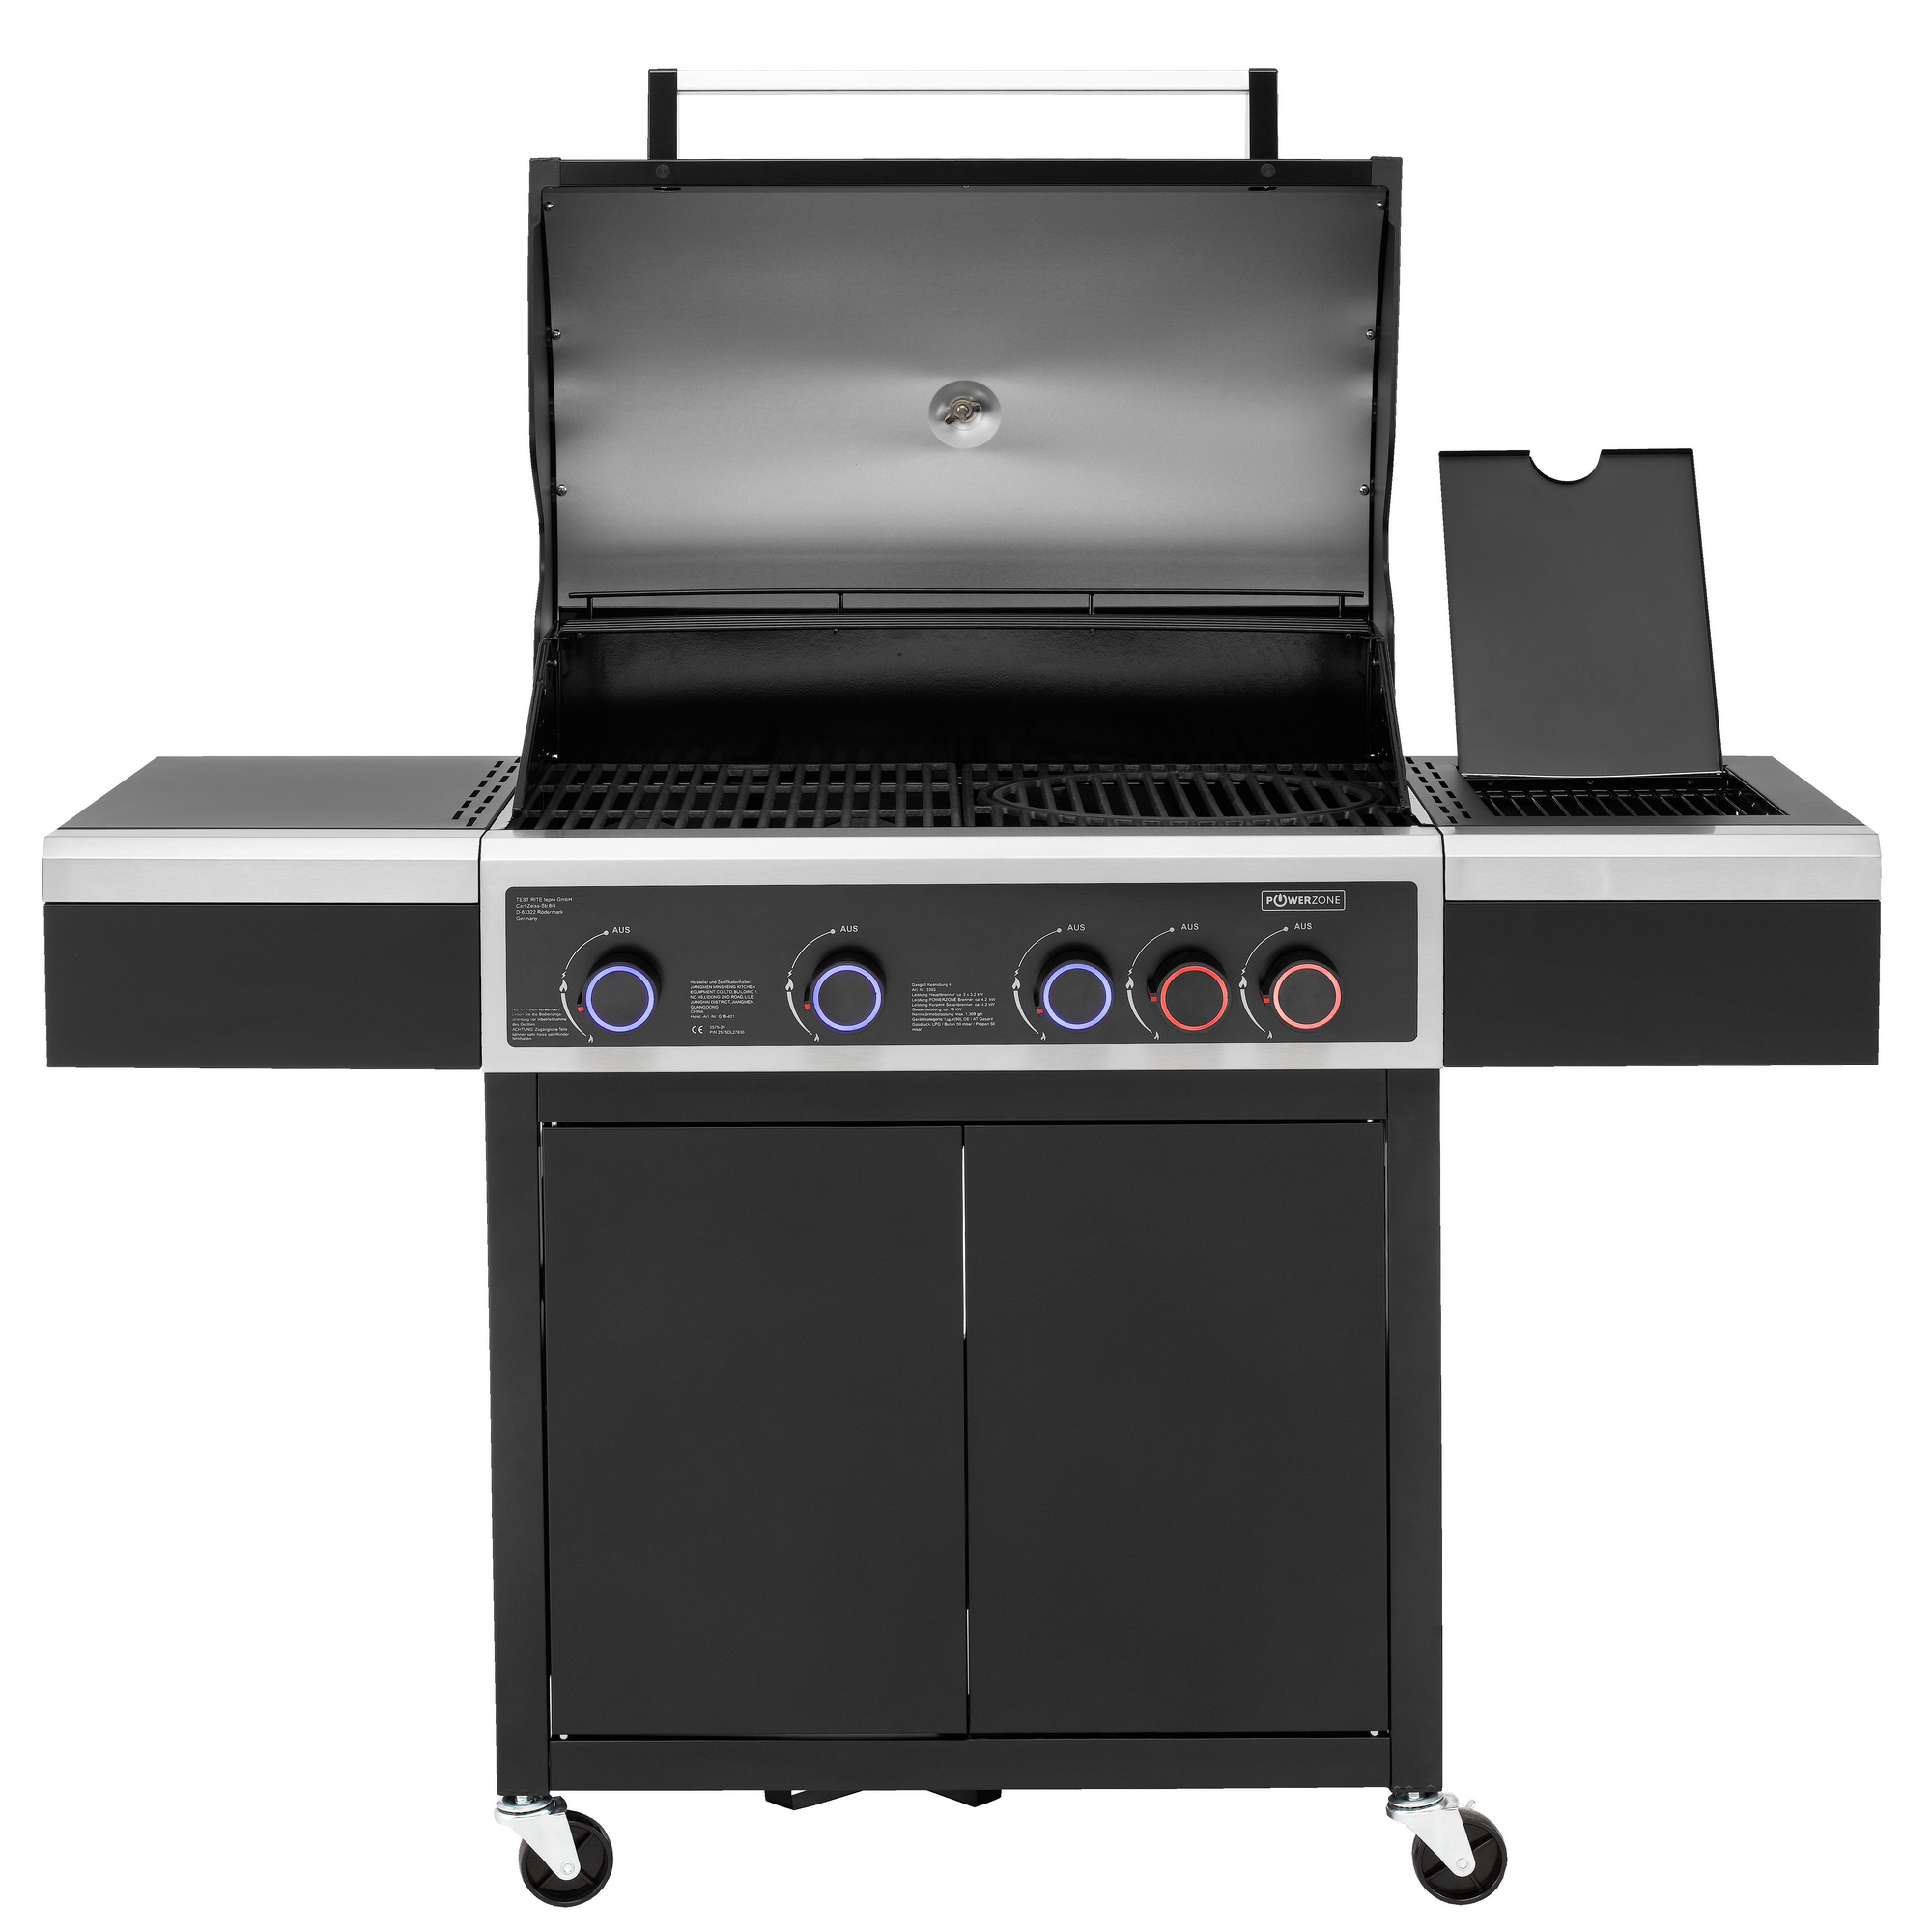 Gasgrill 'Keansburg 4' 5 Brenner, Edelstahl, 138 x 114 x 63 cm + product picture